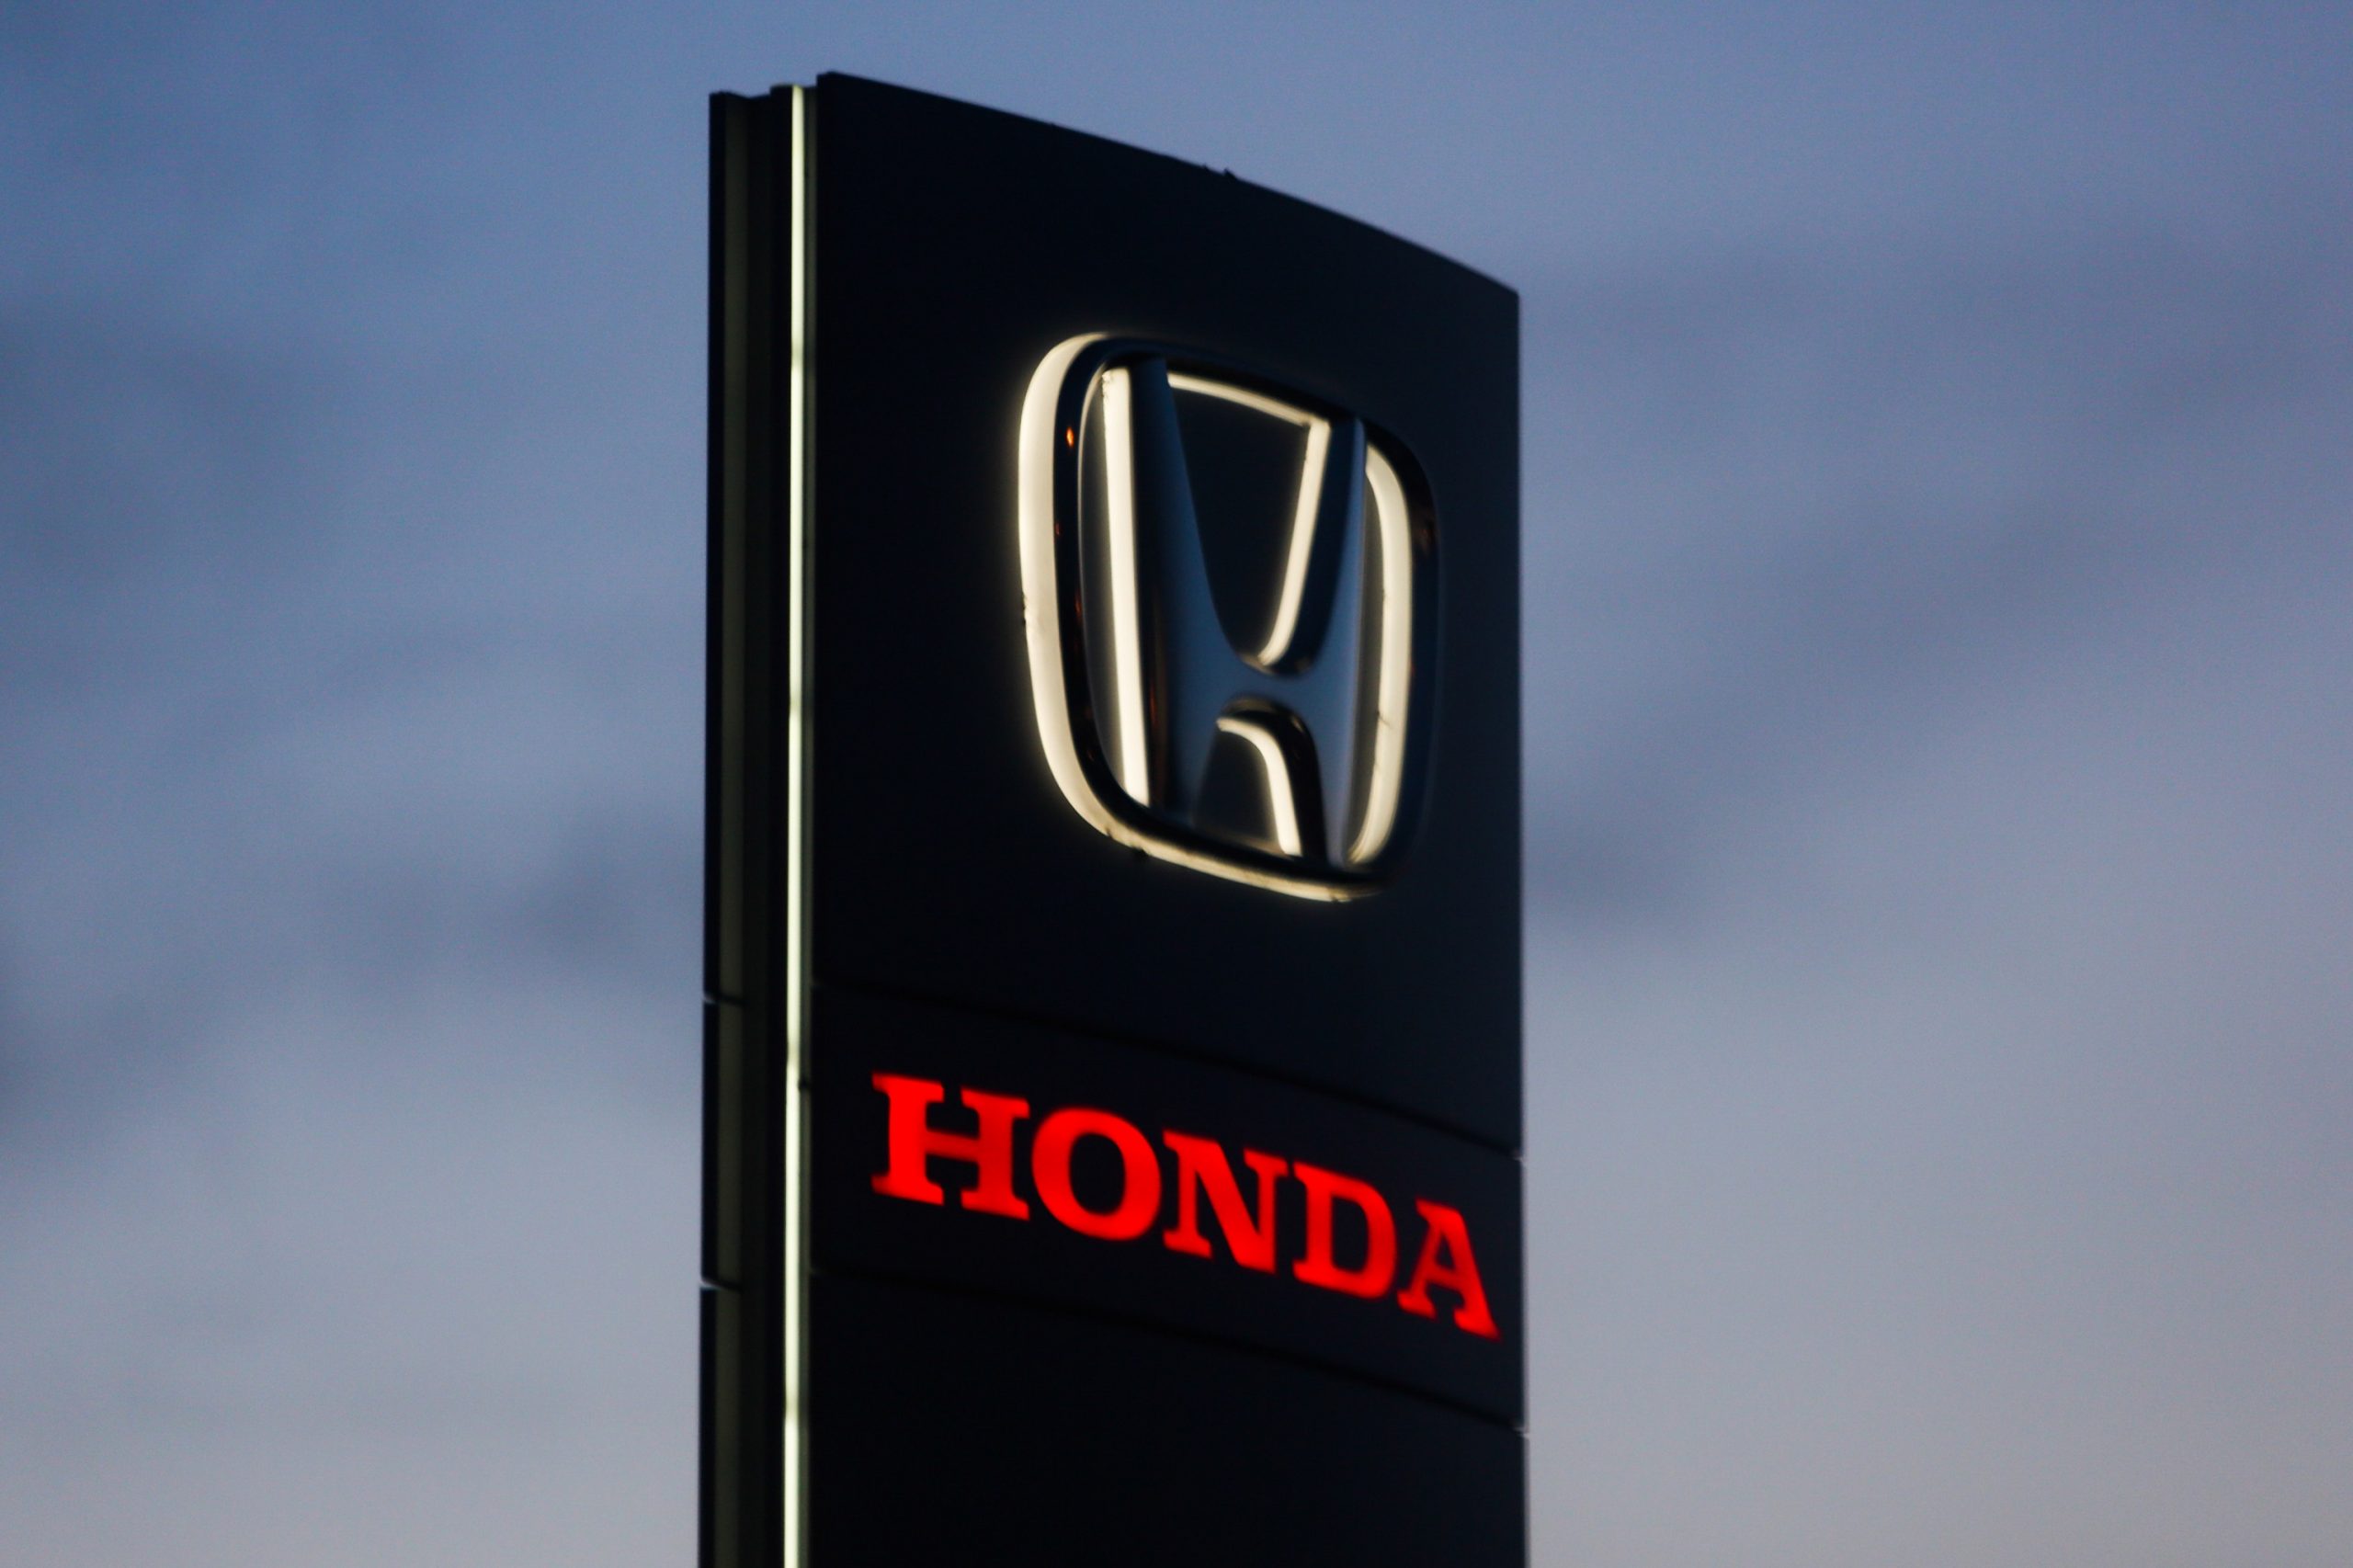 A red Honda Logo on a sign in Poland